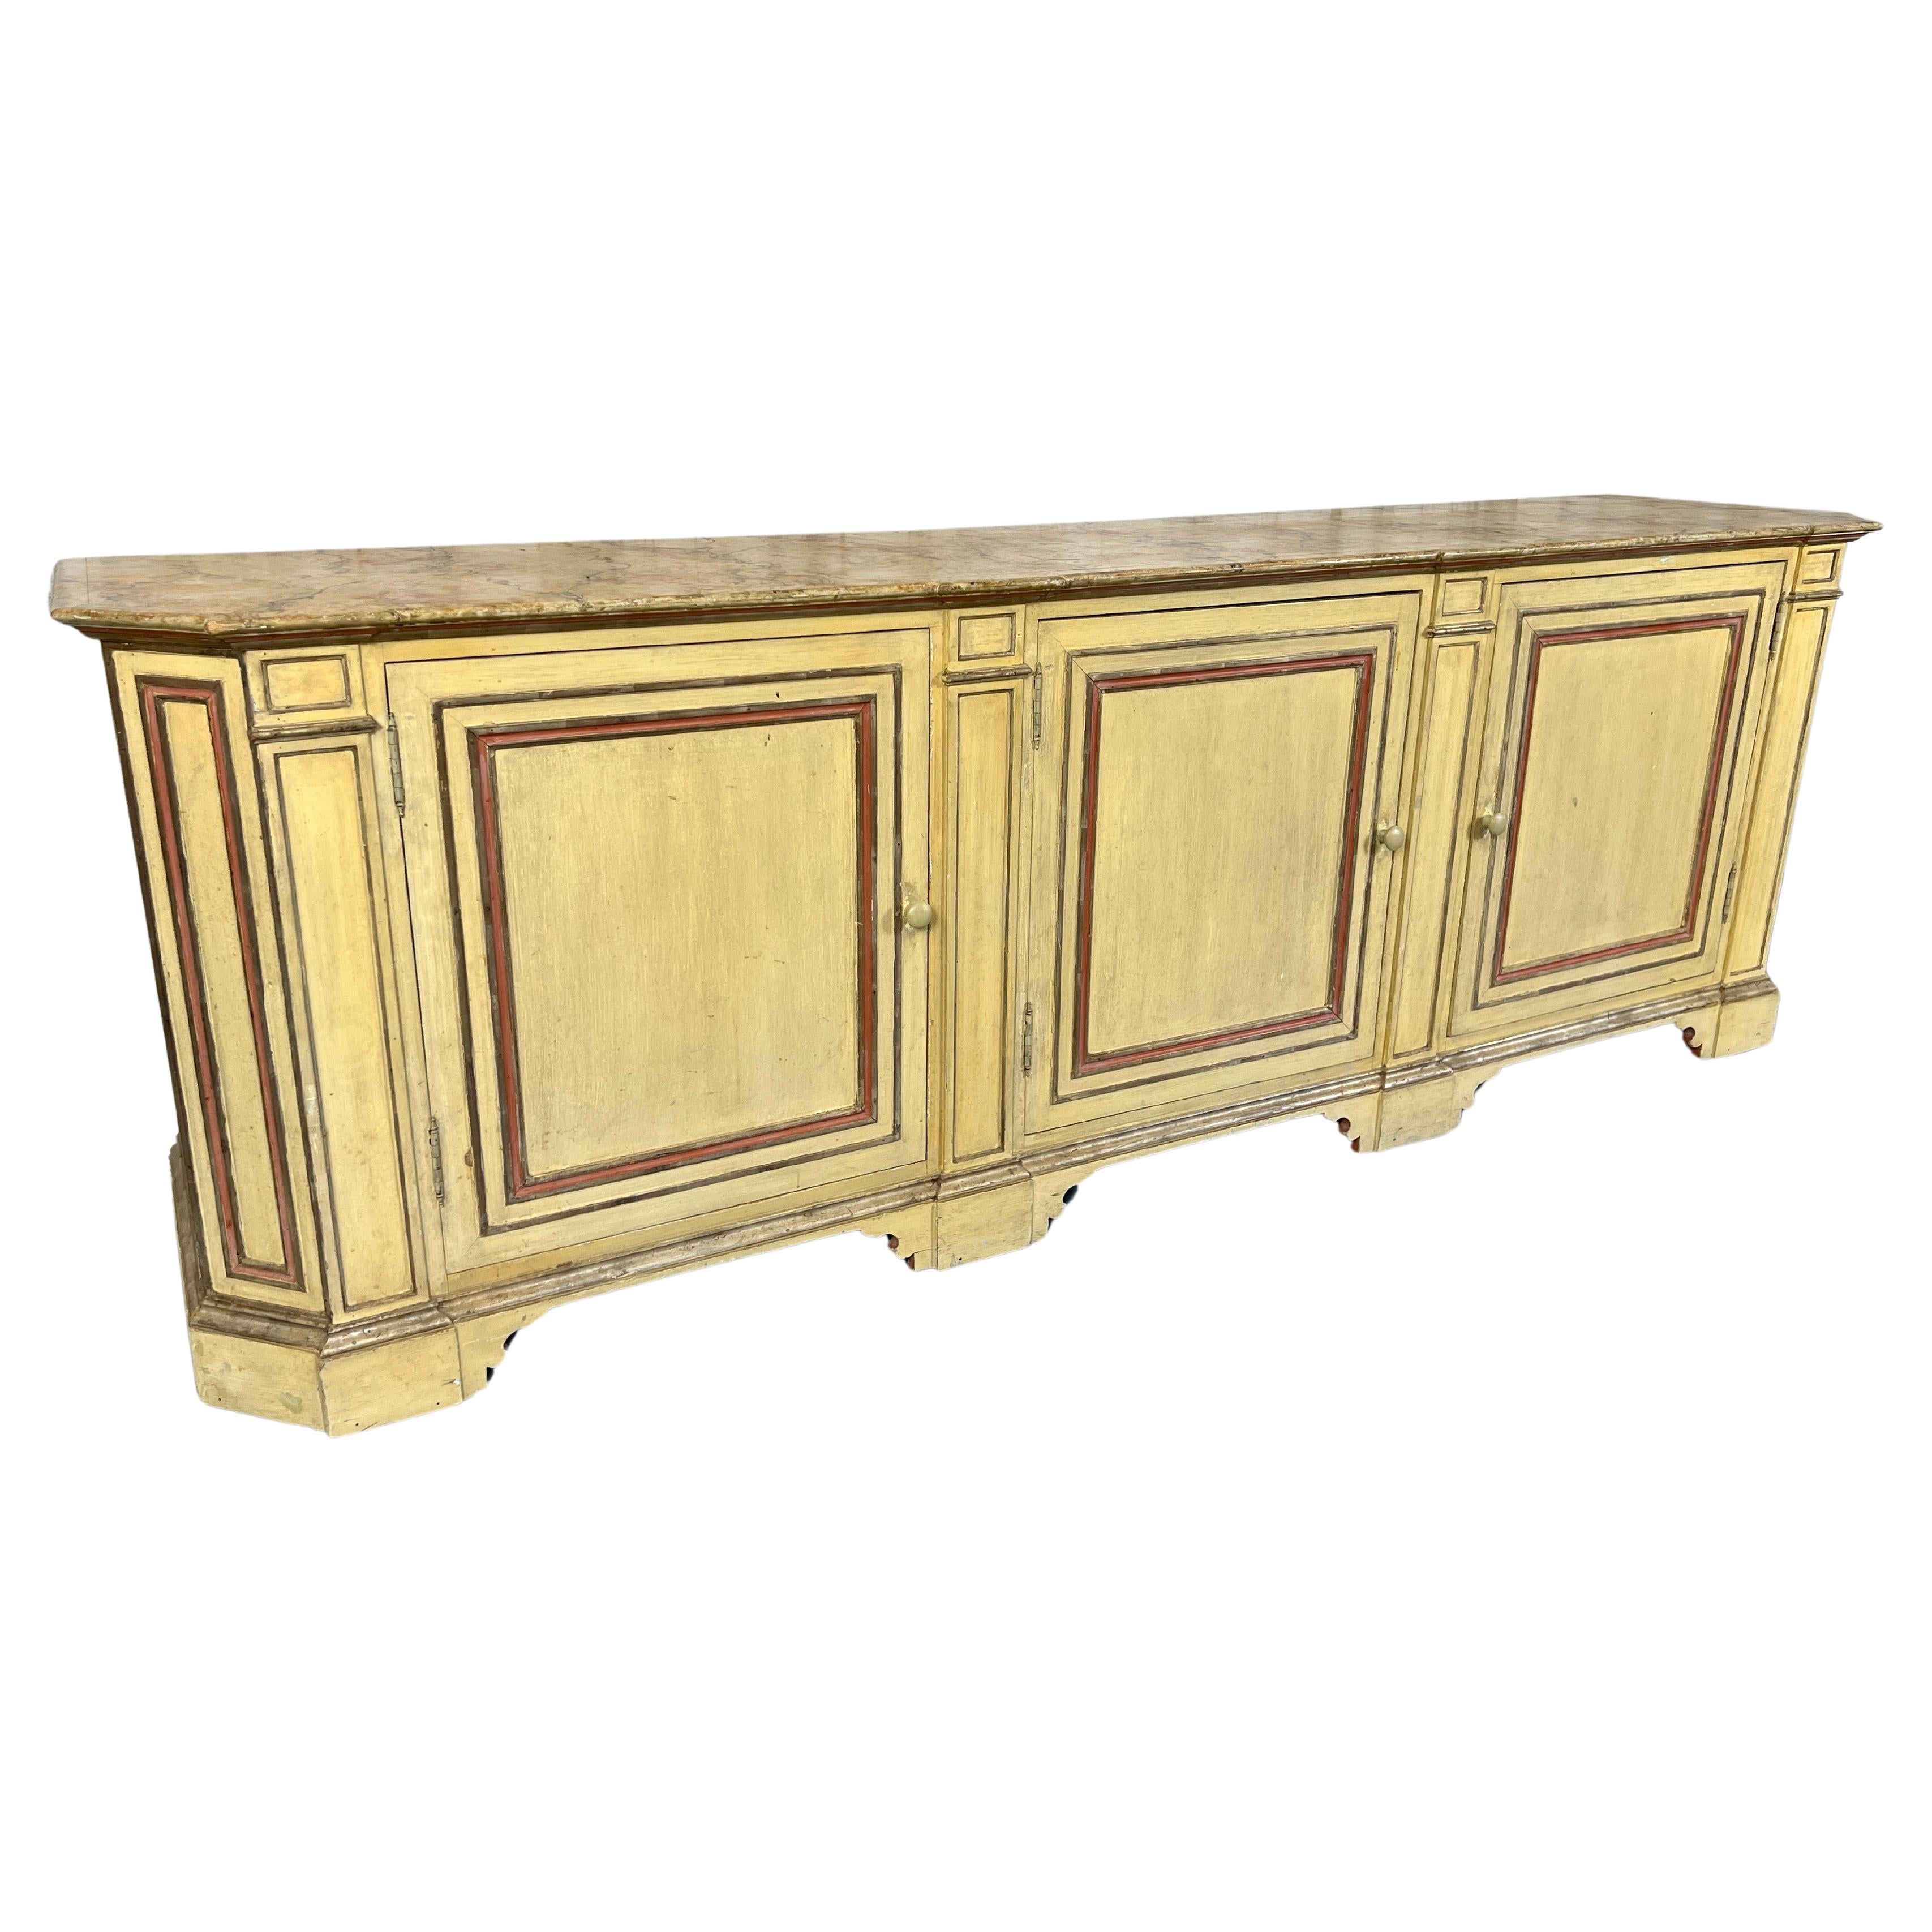 Rustic Italian Hand Painted with Faux Marble top Buffet